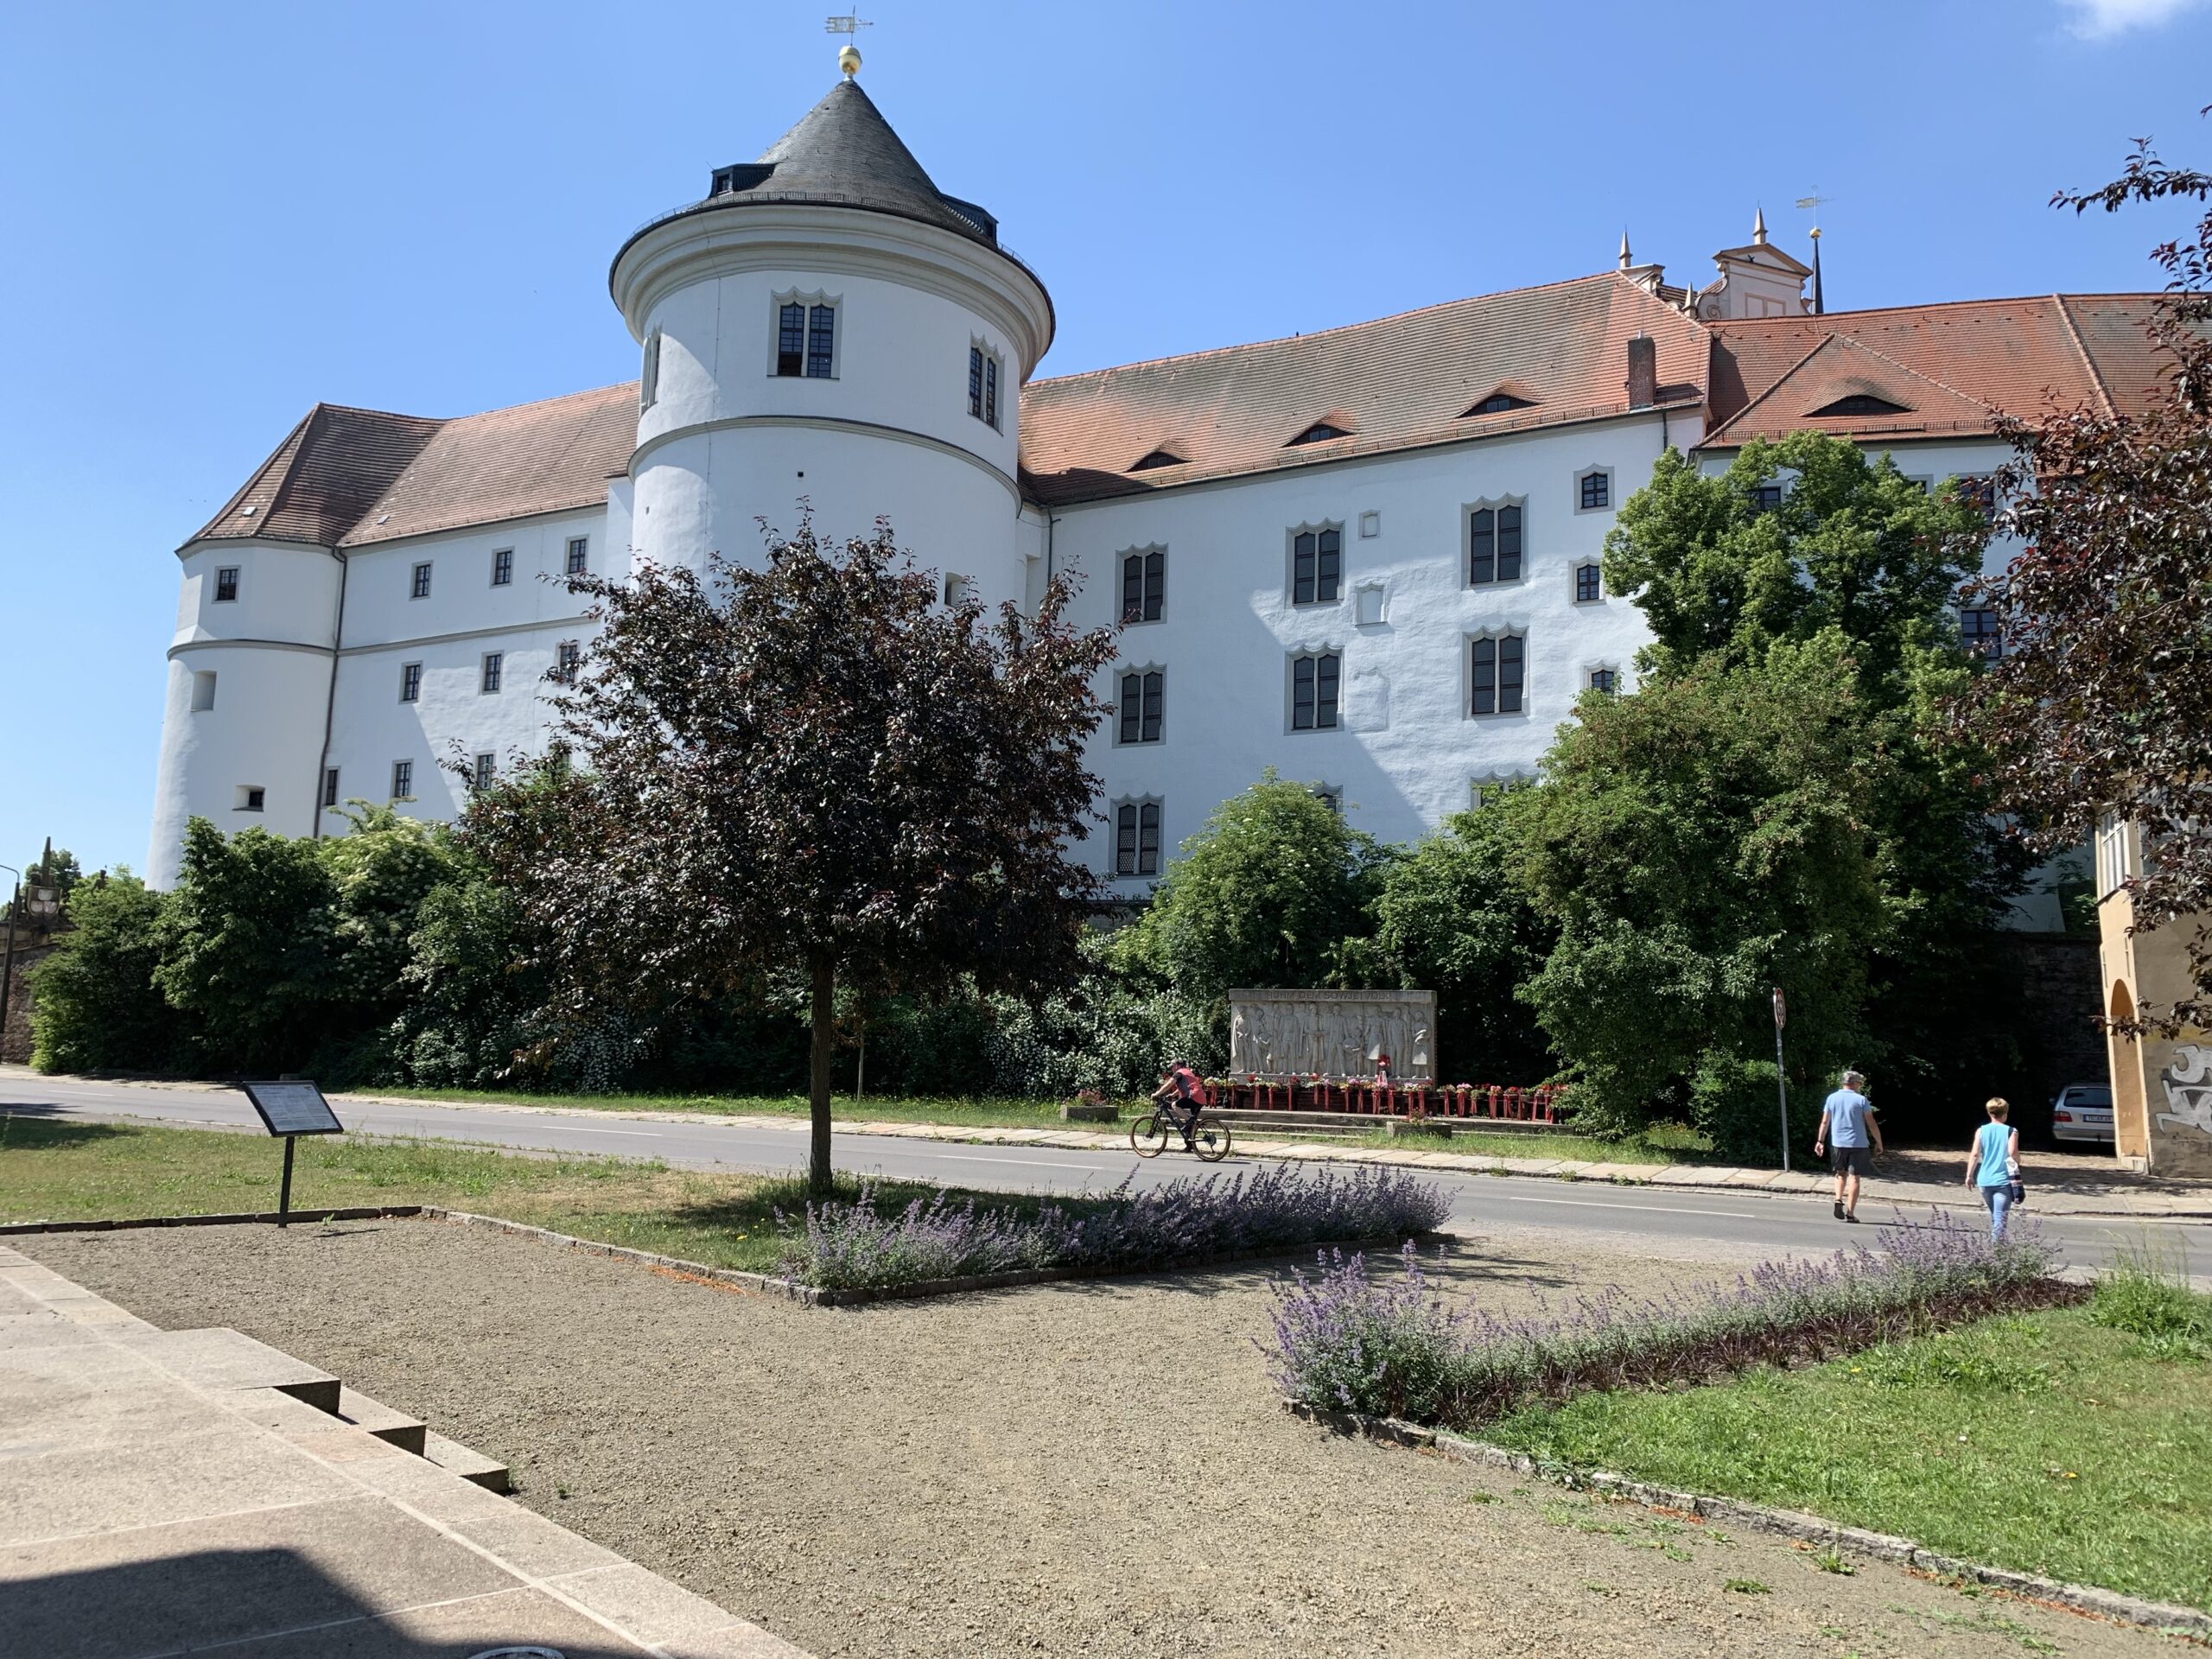 The castle of Torgau which Luther visited many times to sharpen up his ideas. As to Luther’s own words: “Wittenberg is the mother, Torgau the wet nurse of the reformation”